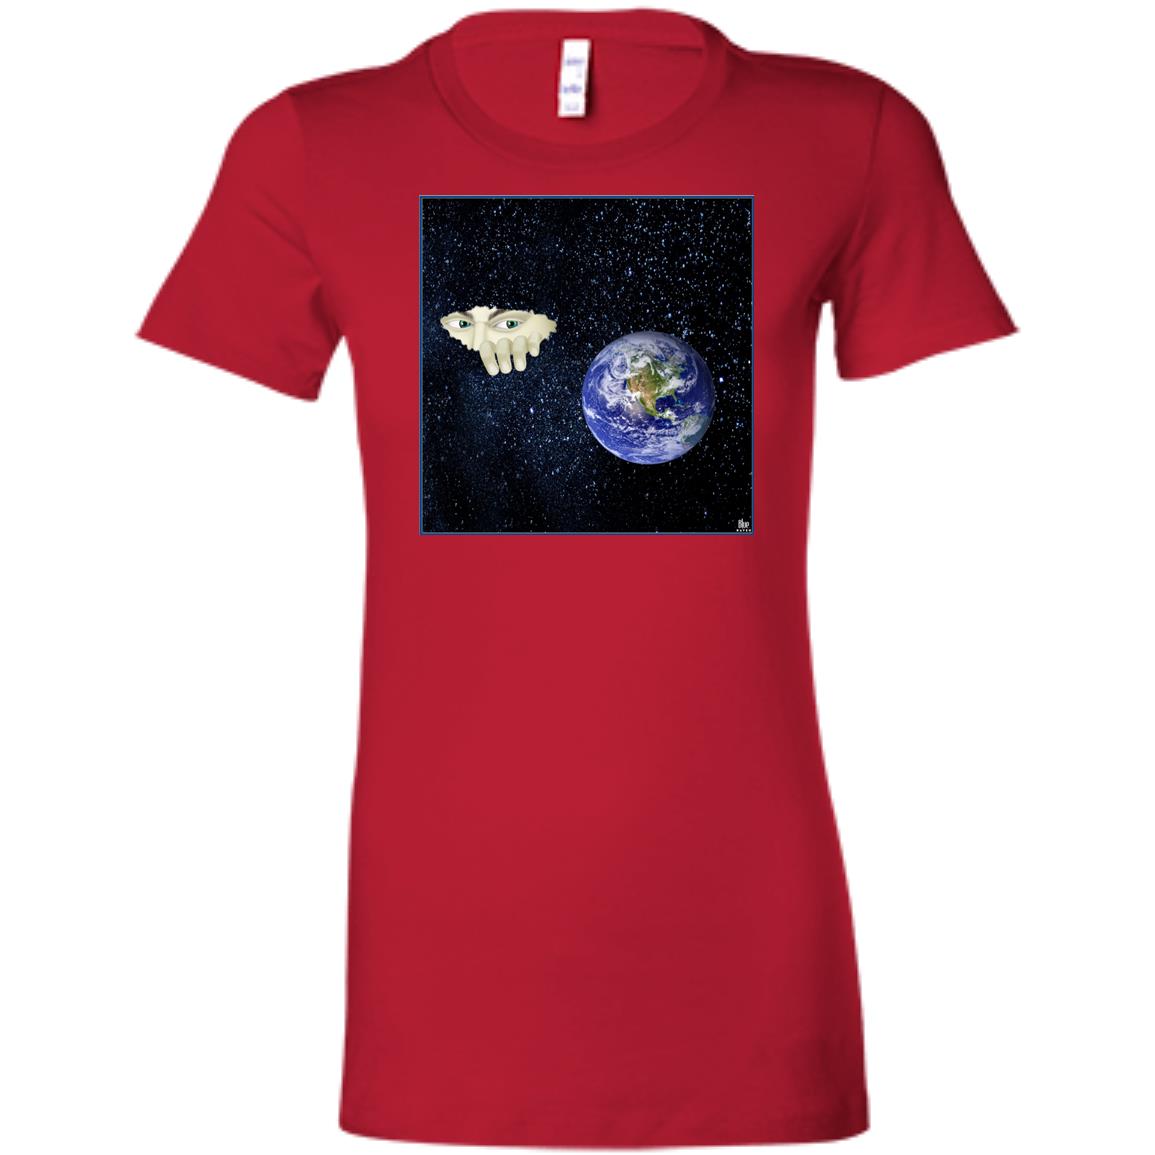 SOMEWHERE OUT THERE - Women's Fitted T-Shirt